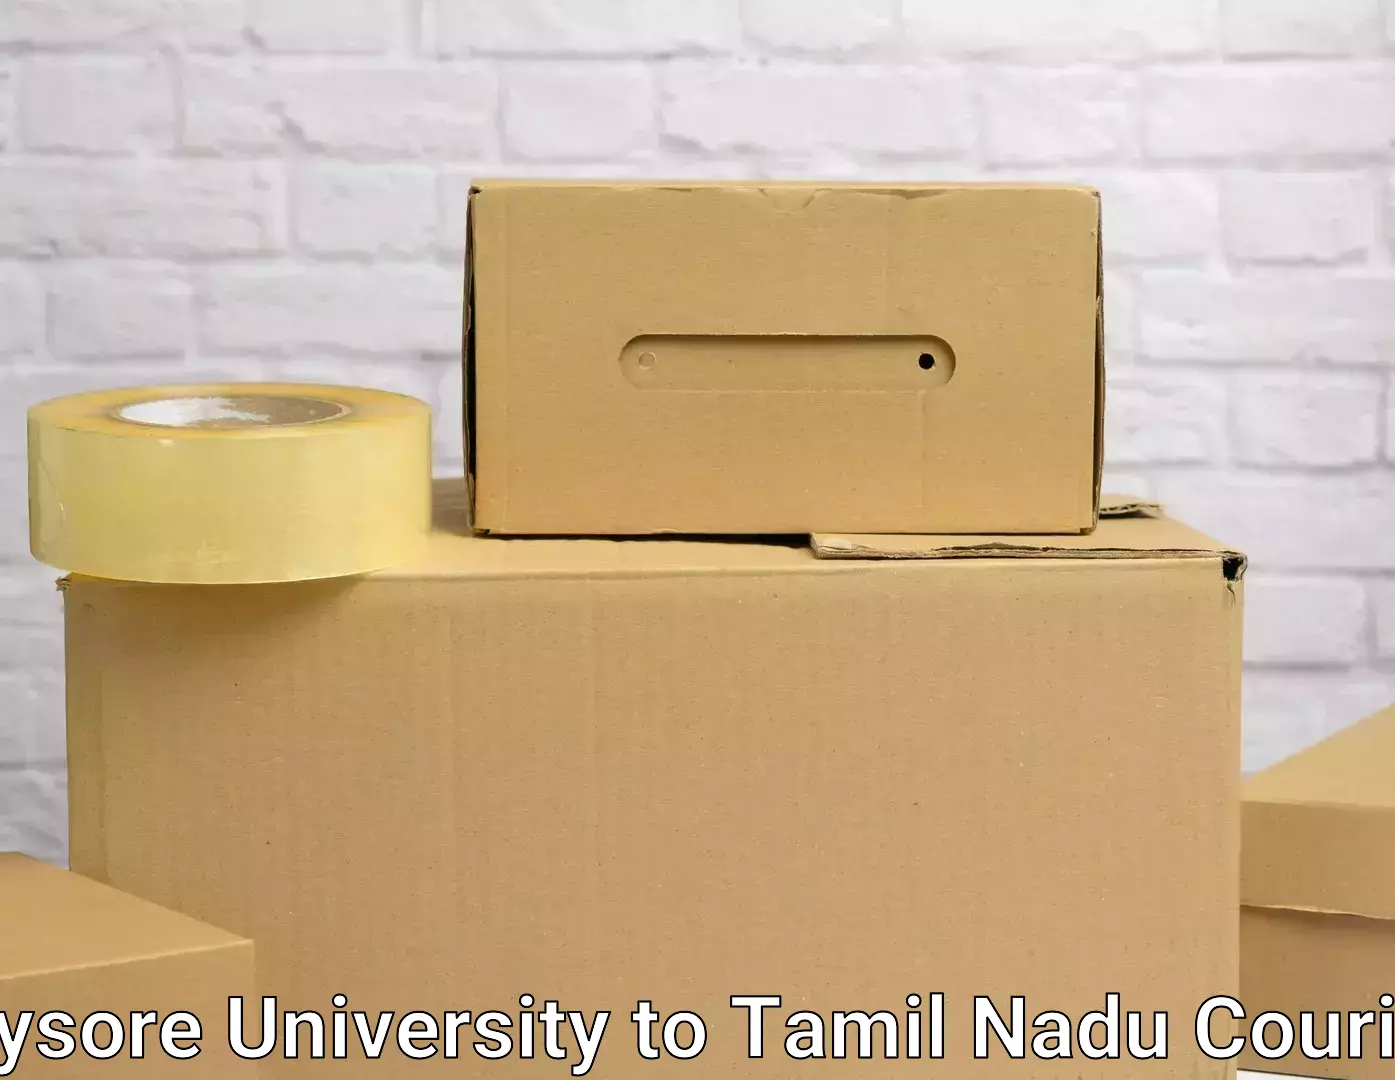 Quality furniture shipping in Mysore University to Tamil Nadu